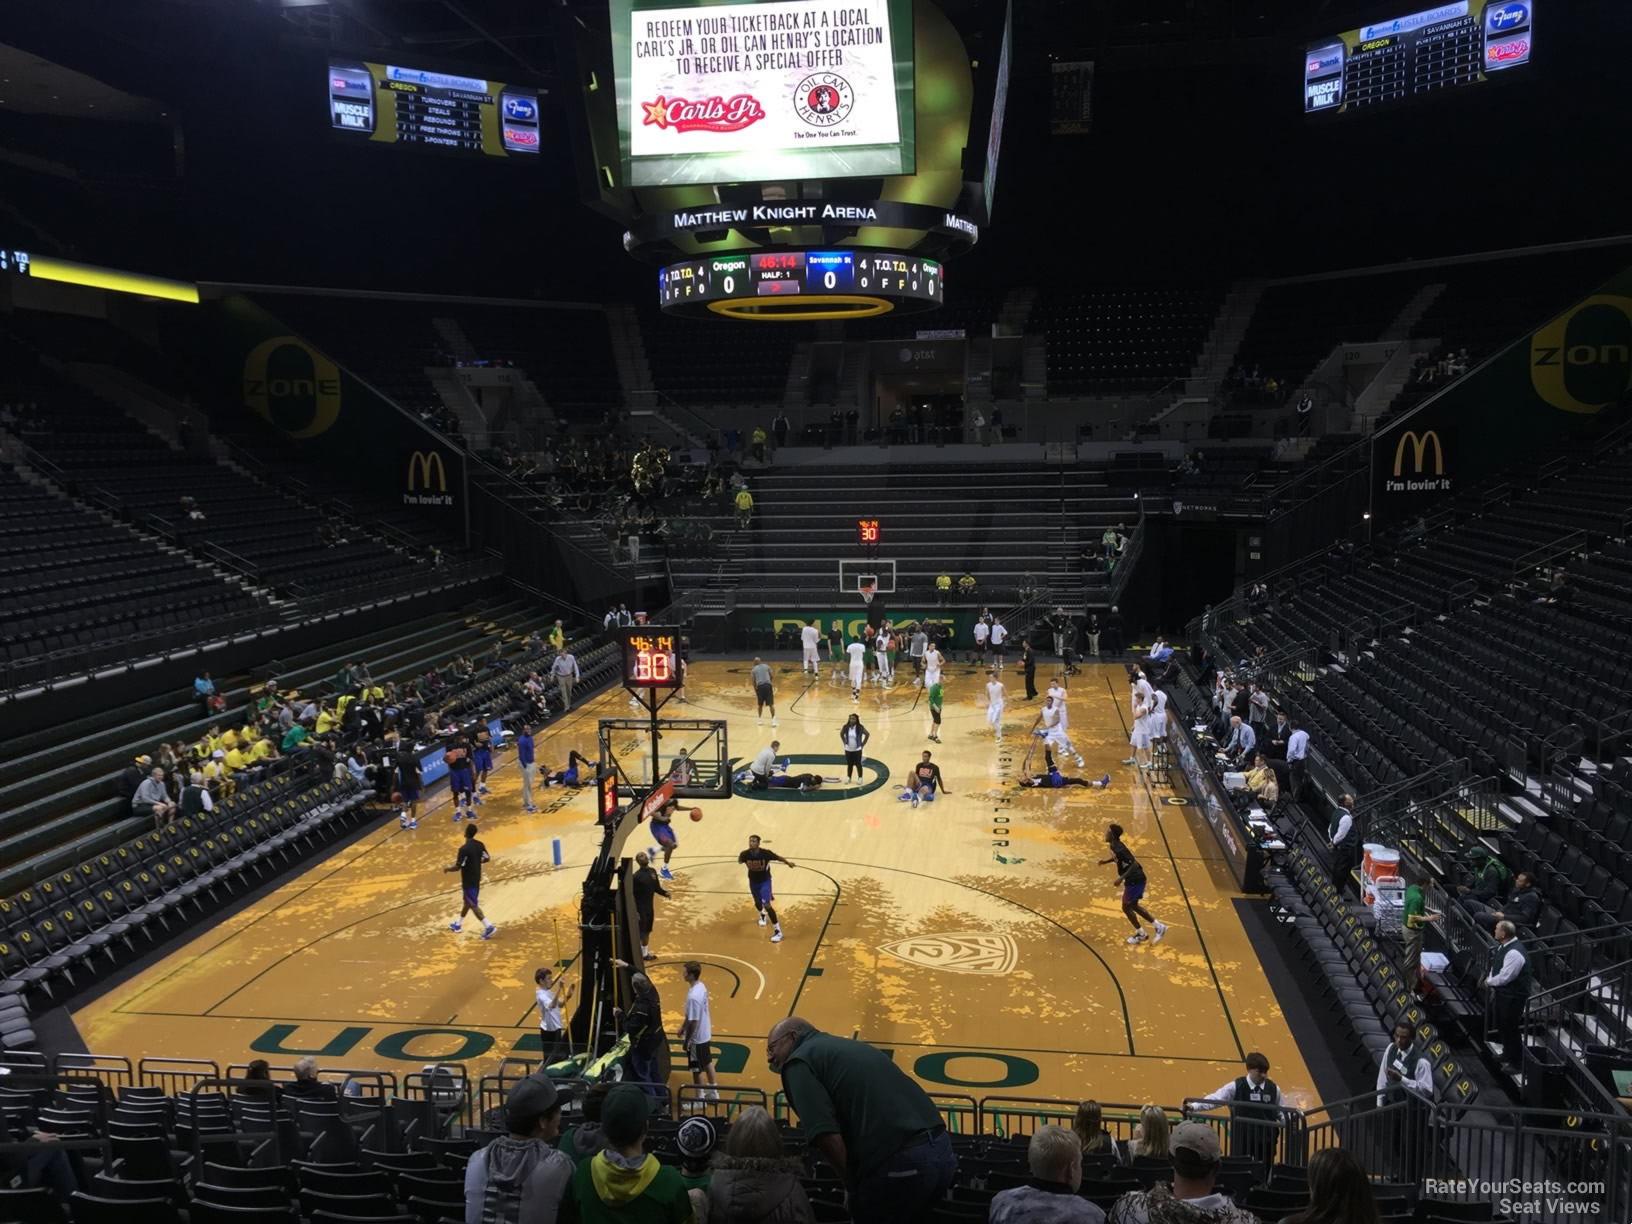 section 107, row k seat view  - matthew knight arena